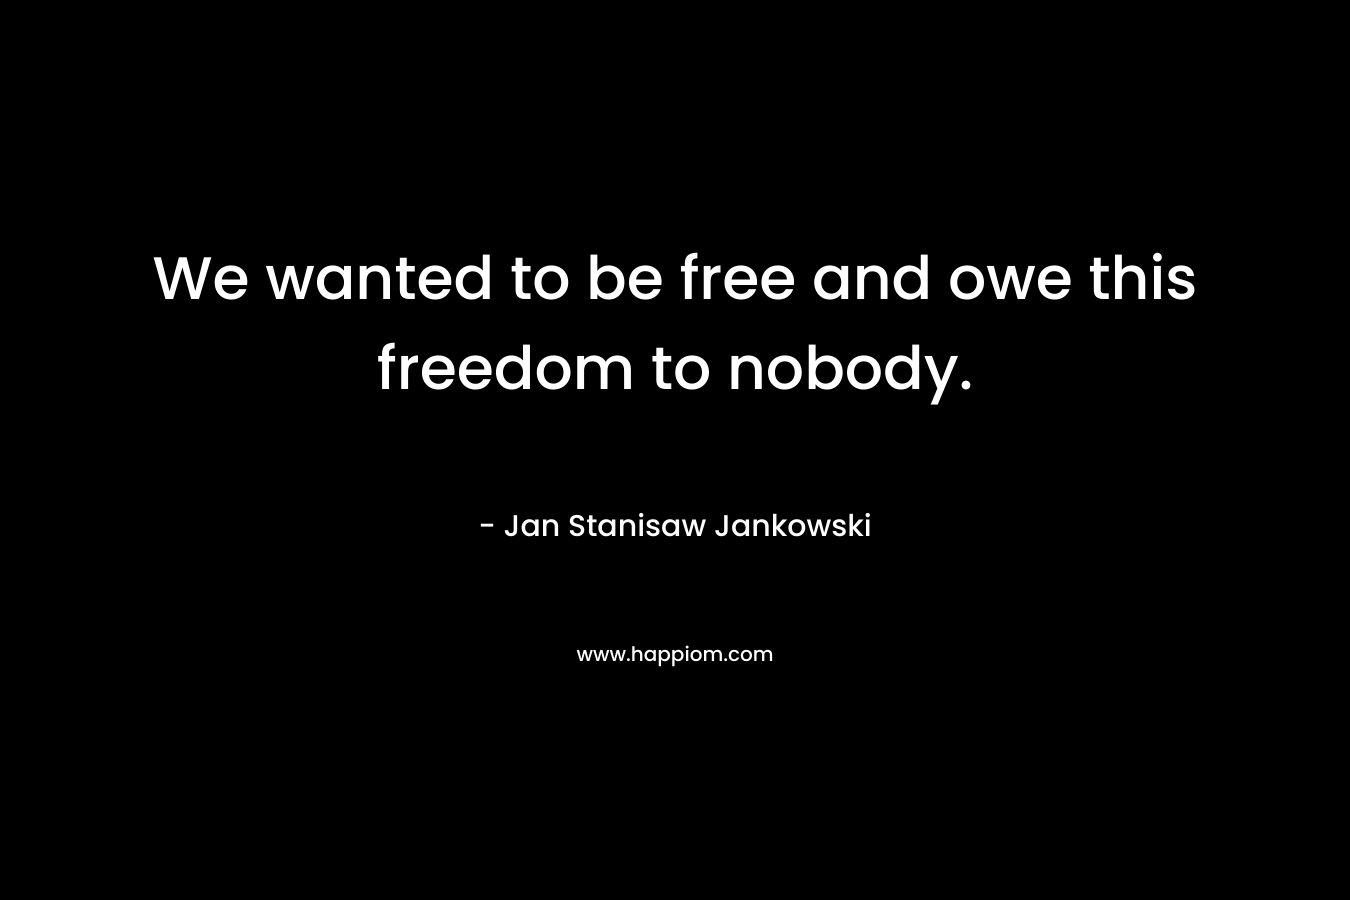 We wanted to be free and owe this freedom to nobody.